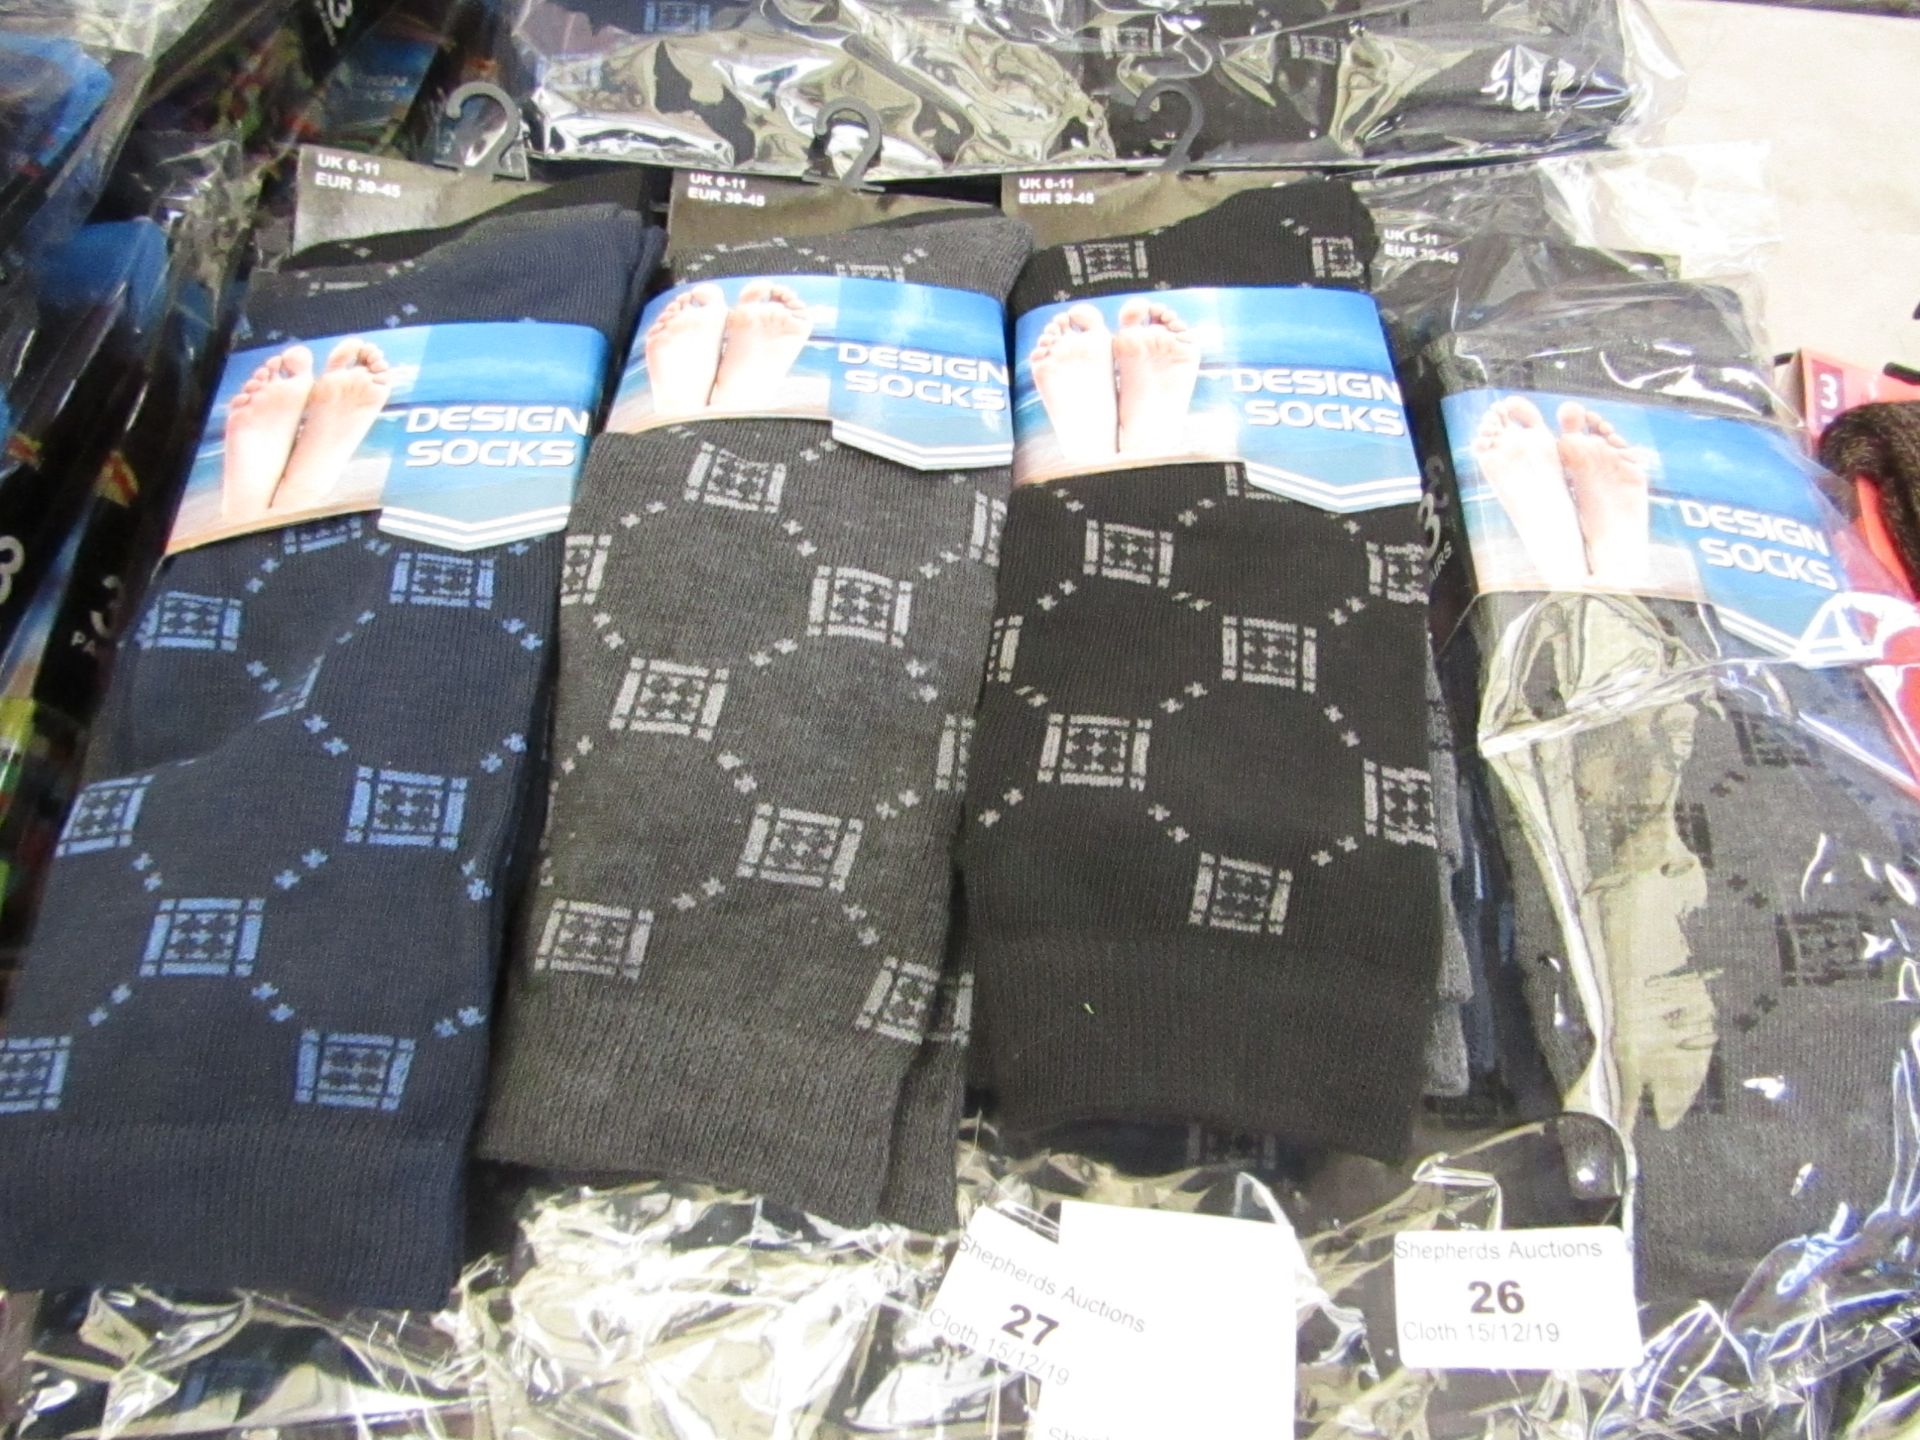 Pack of 12 pairs Mens Design Socks Grey, Navy & Black, size 6-11 all new in packaging